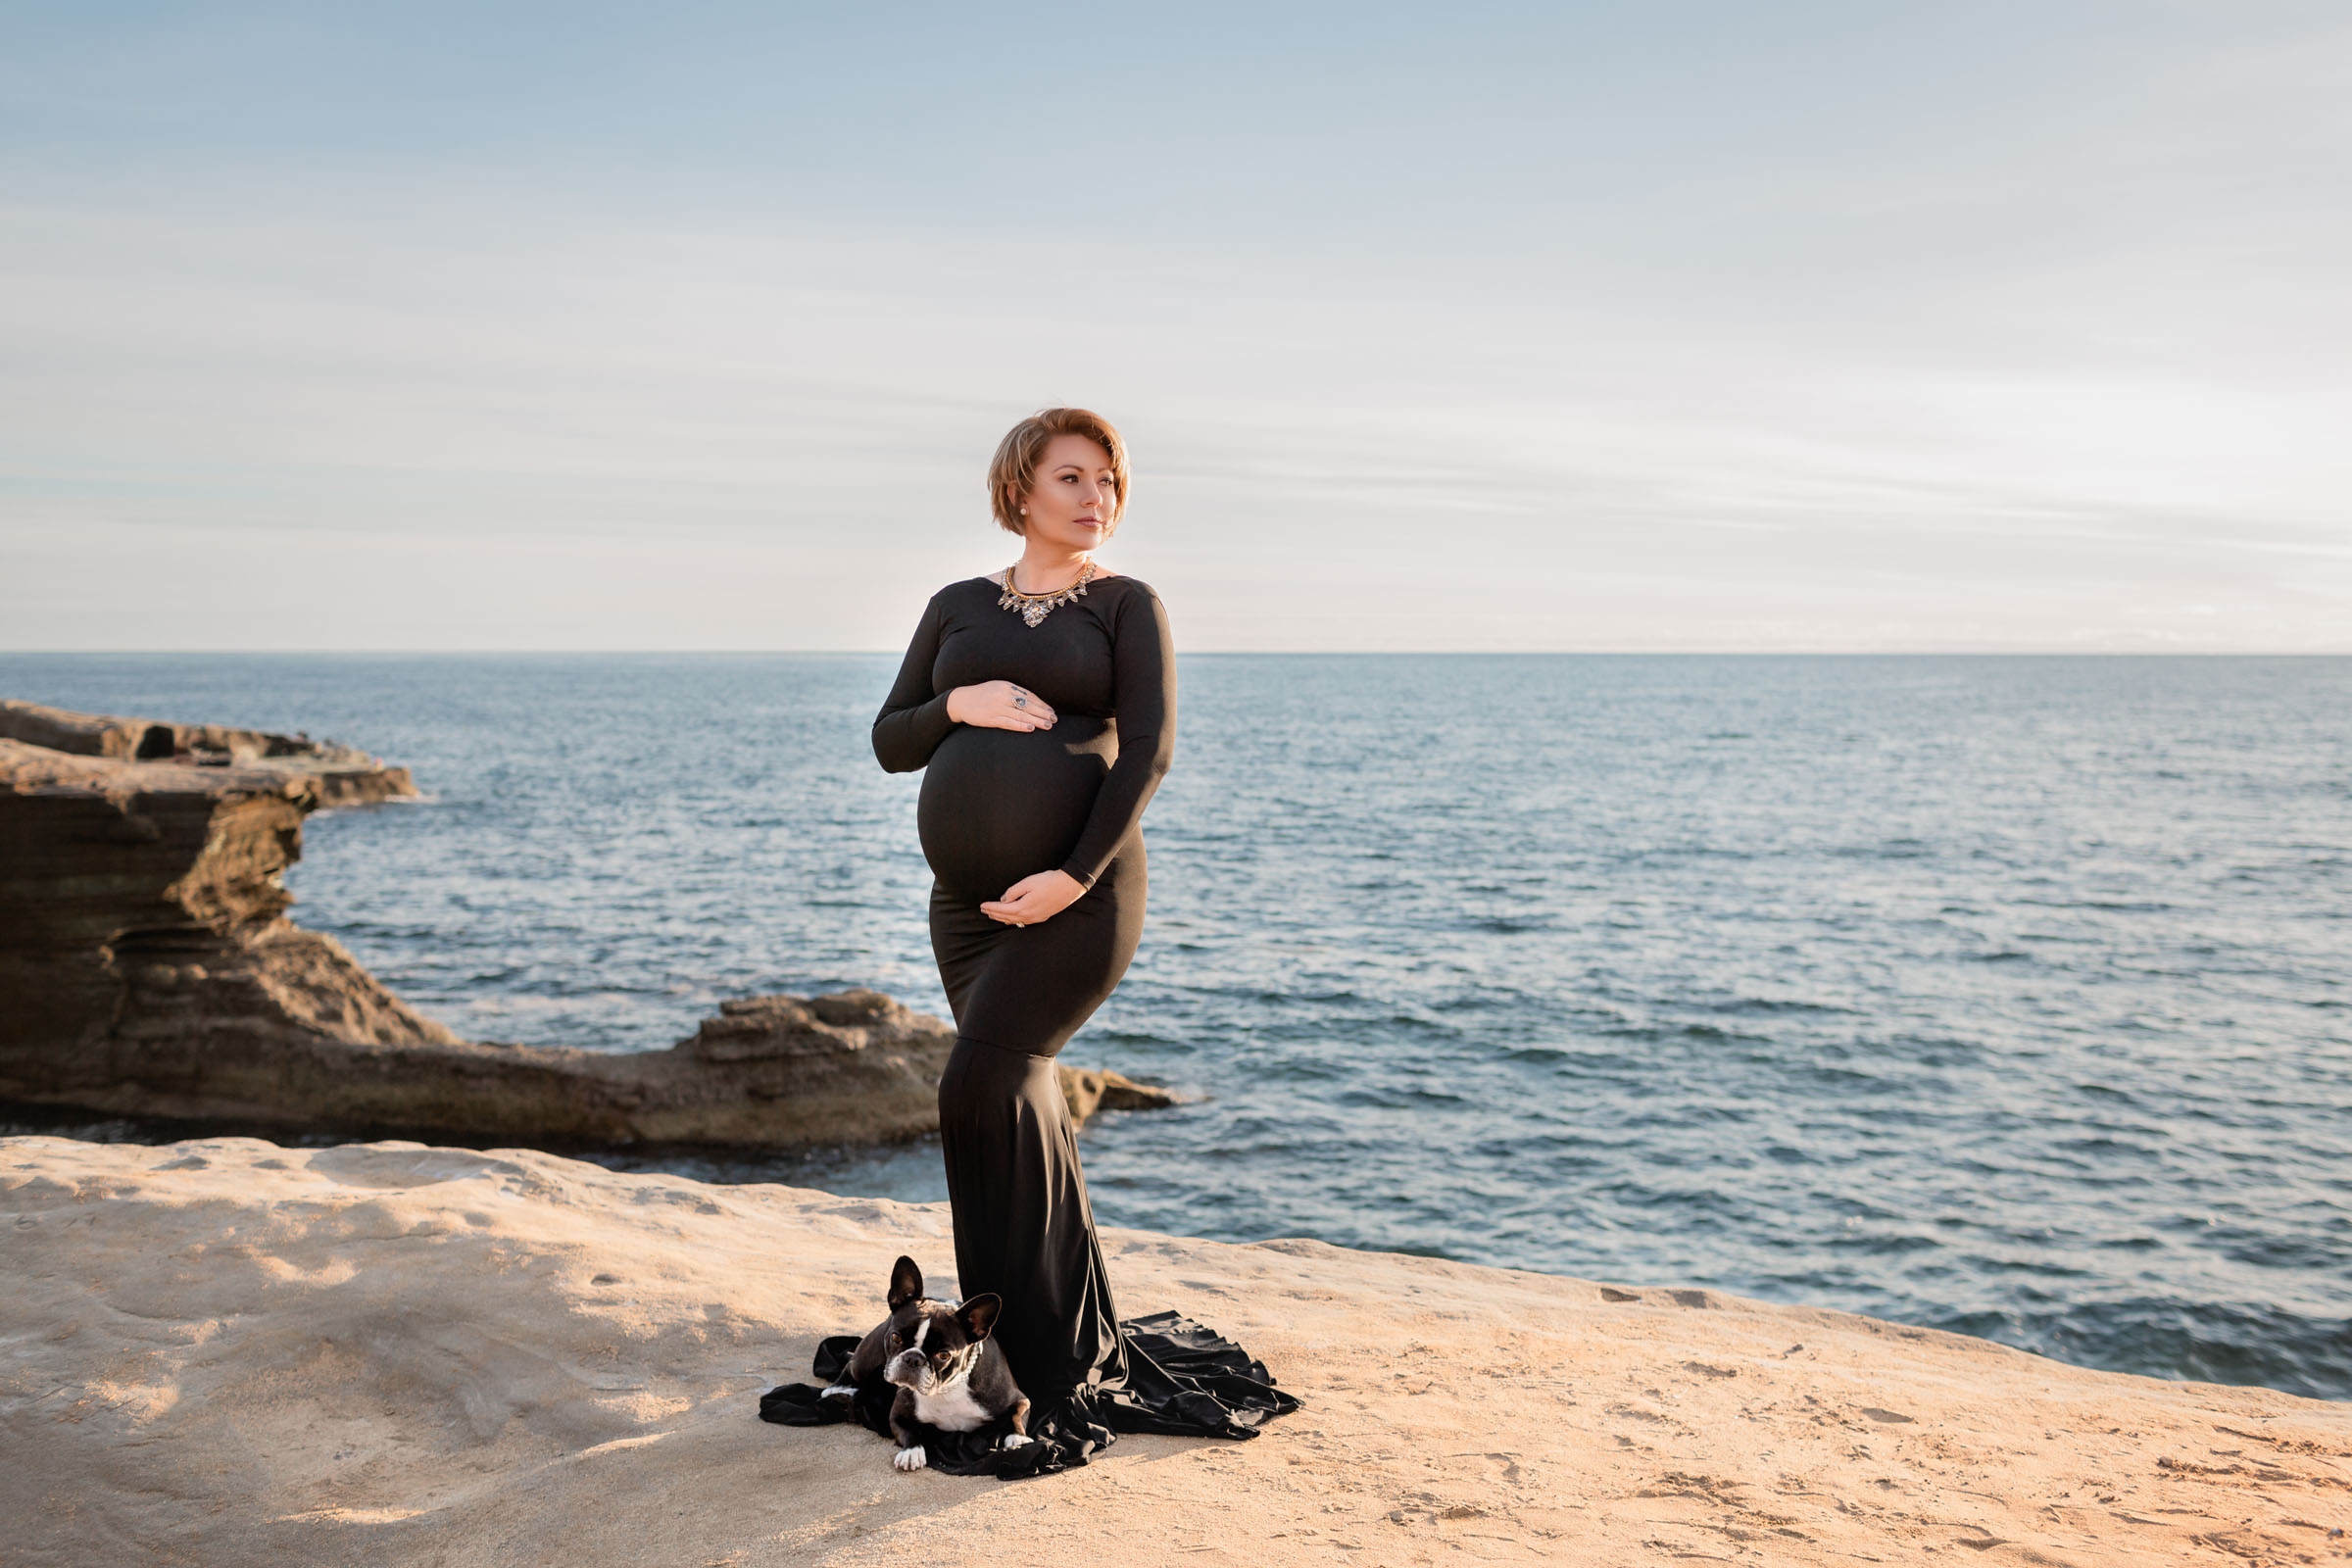 Capturing dramatic maternity pictures at one of the best San Diego locations for maternity photos by Sunset Cliffs